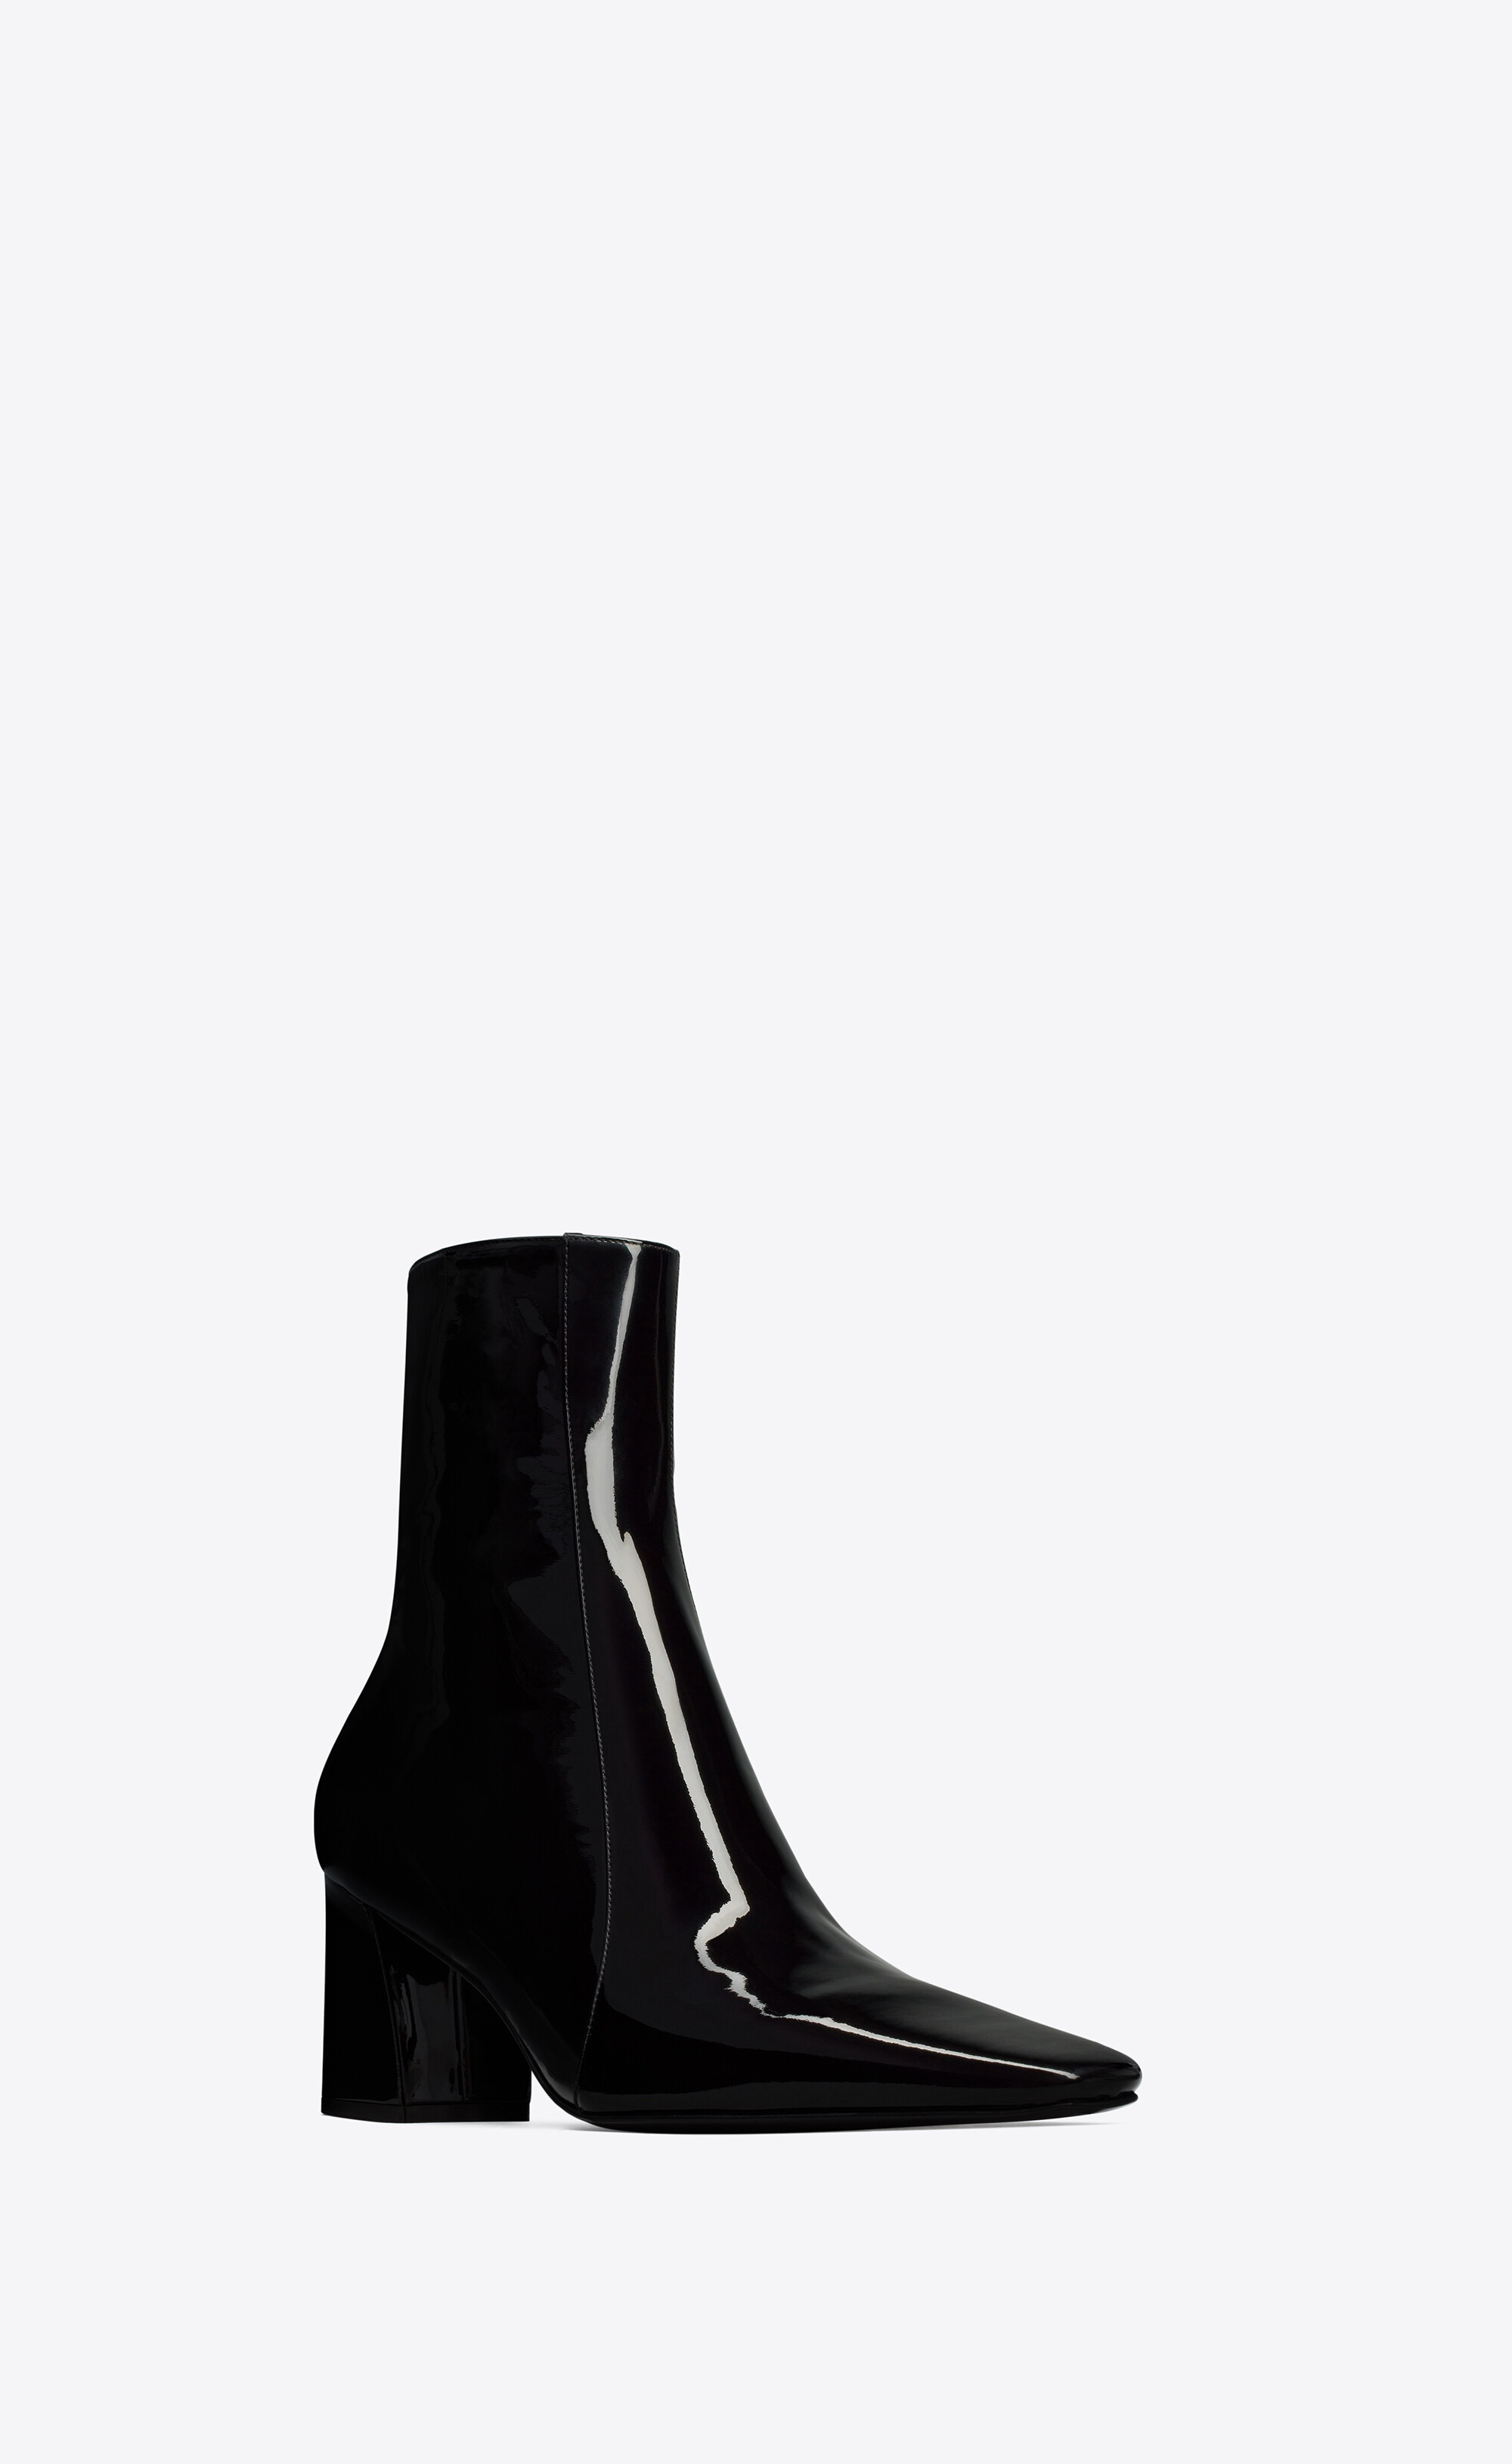 rainer zipped boots in patent leather - 4